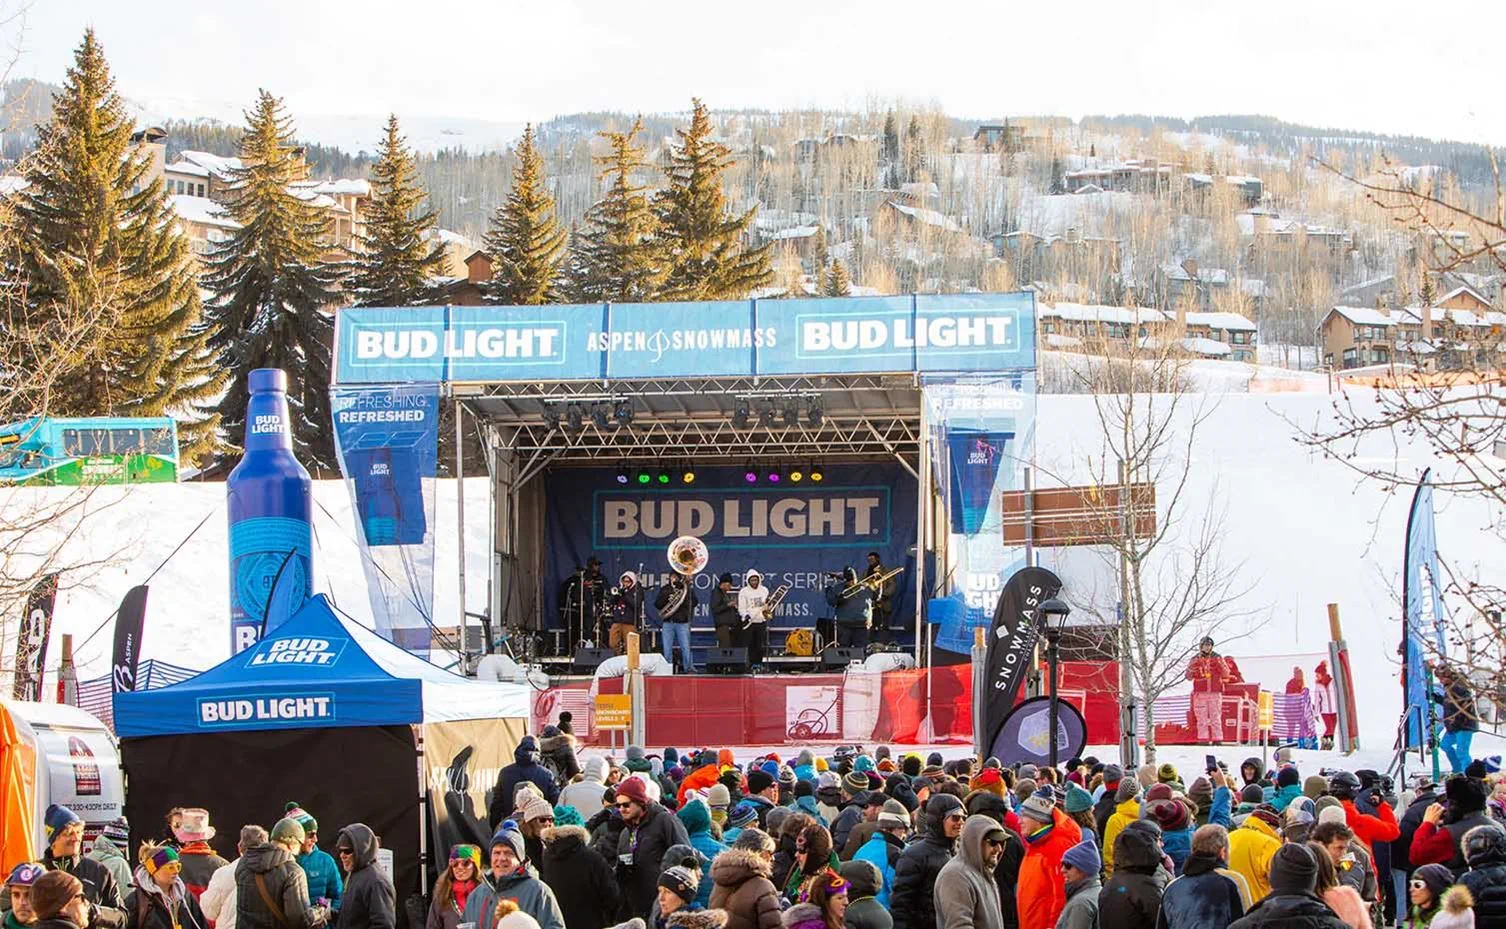 All Spring Events in Aspen Snowmass